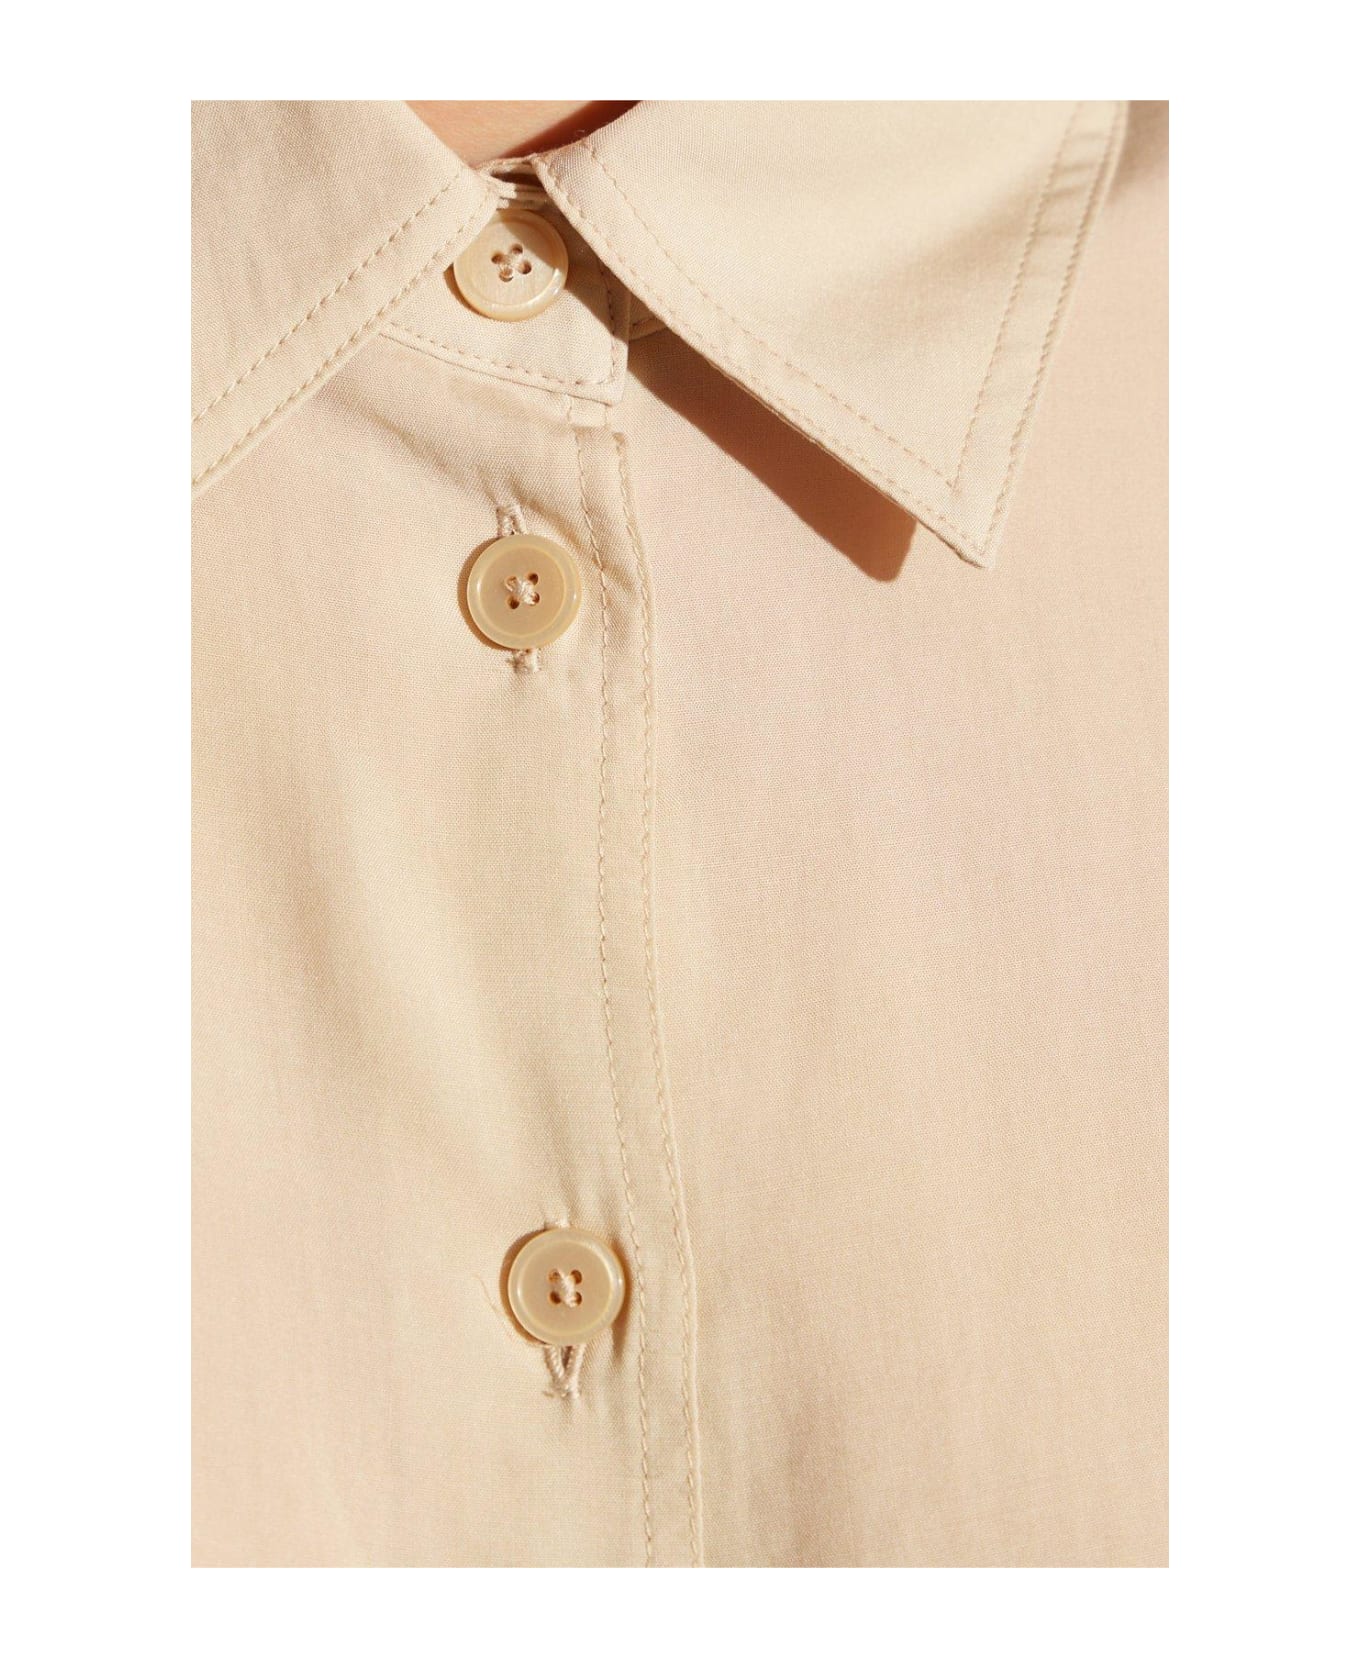 Emporio Armani Relaxed Fitting Top - Beige トップス